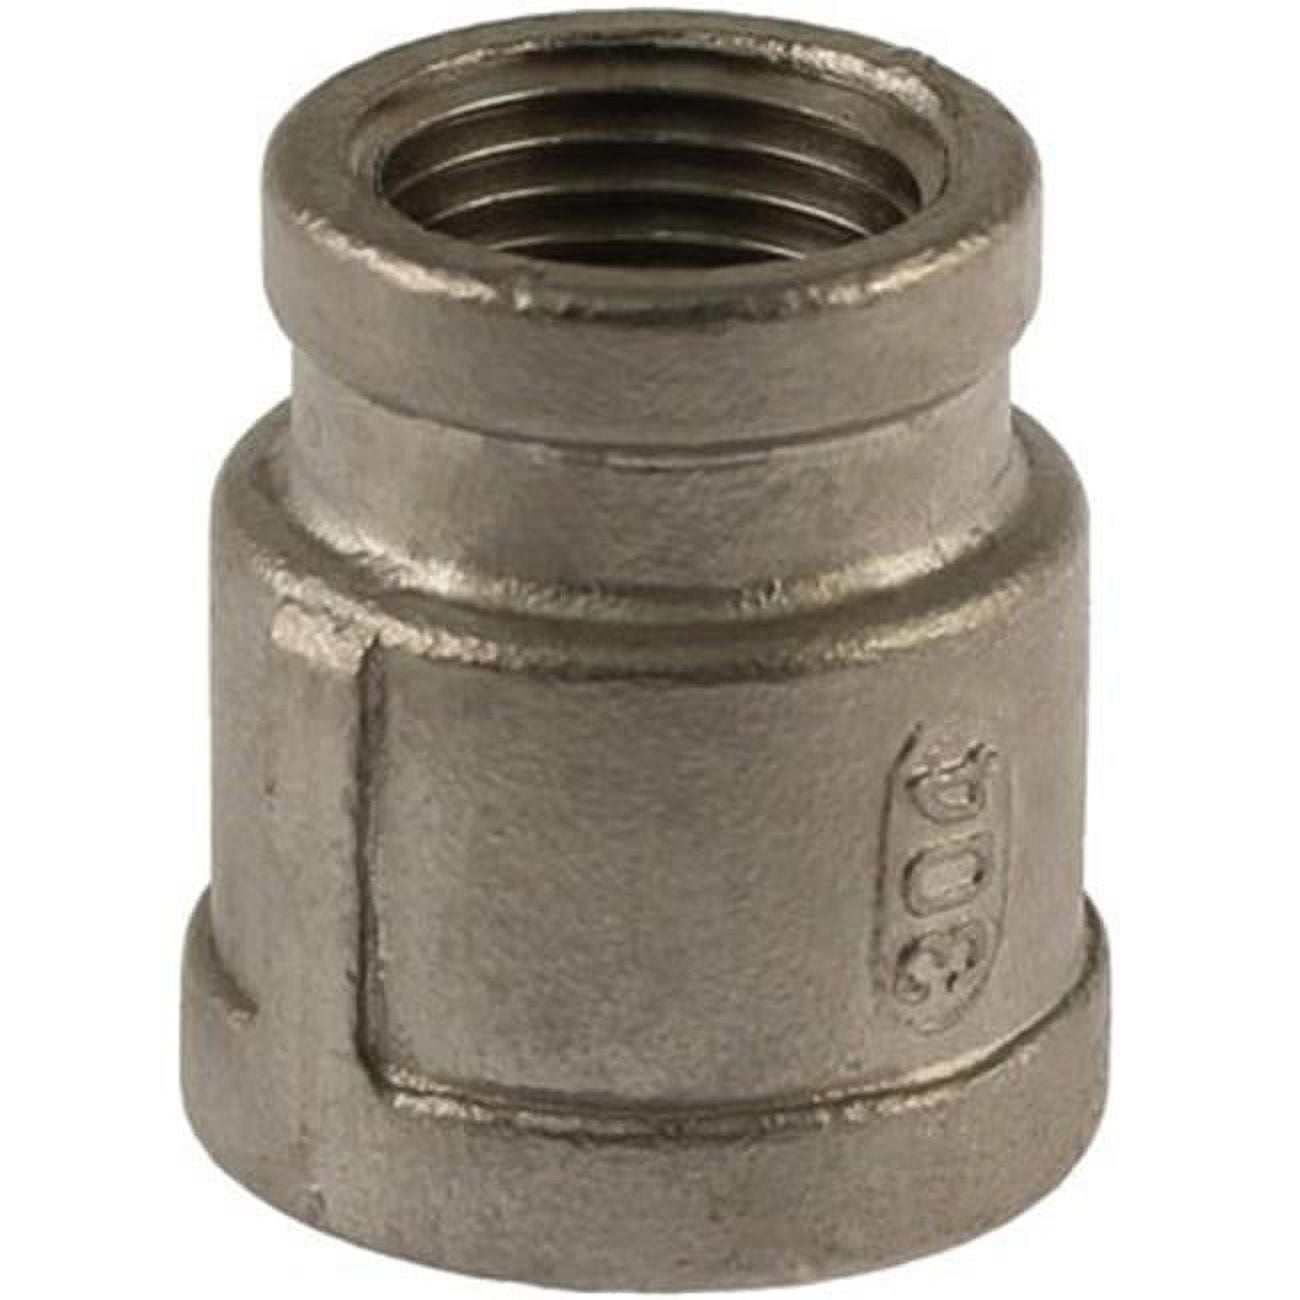 U2-ssrc-0705 0.75 X 0.5 In. 304stainless Steel Coupling, Red